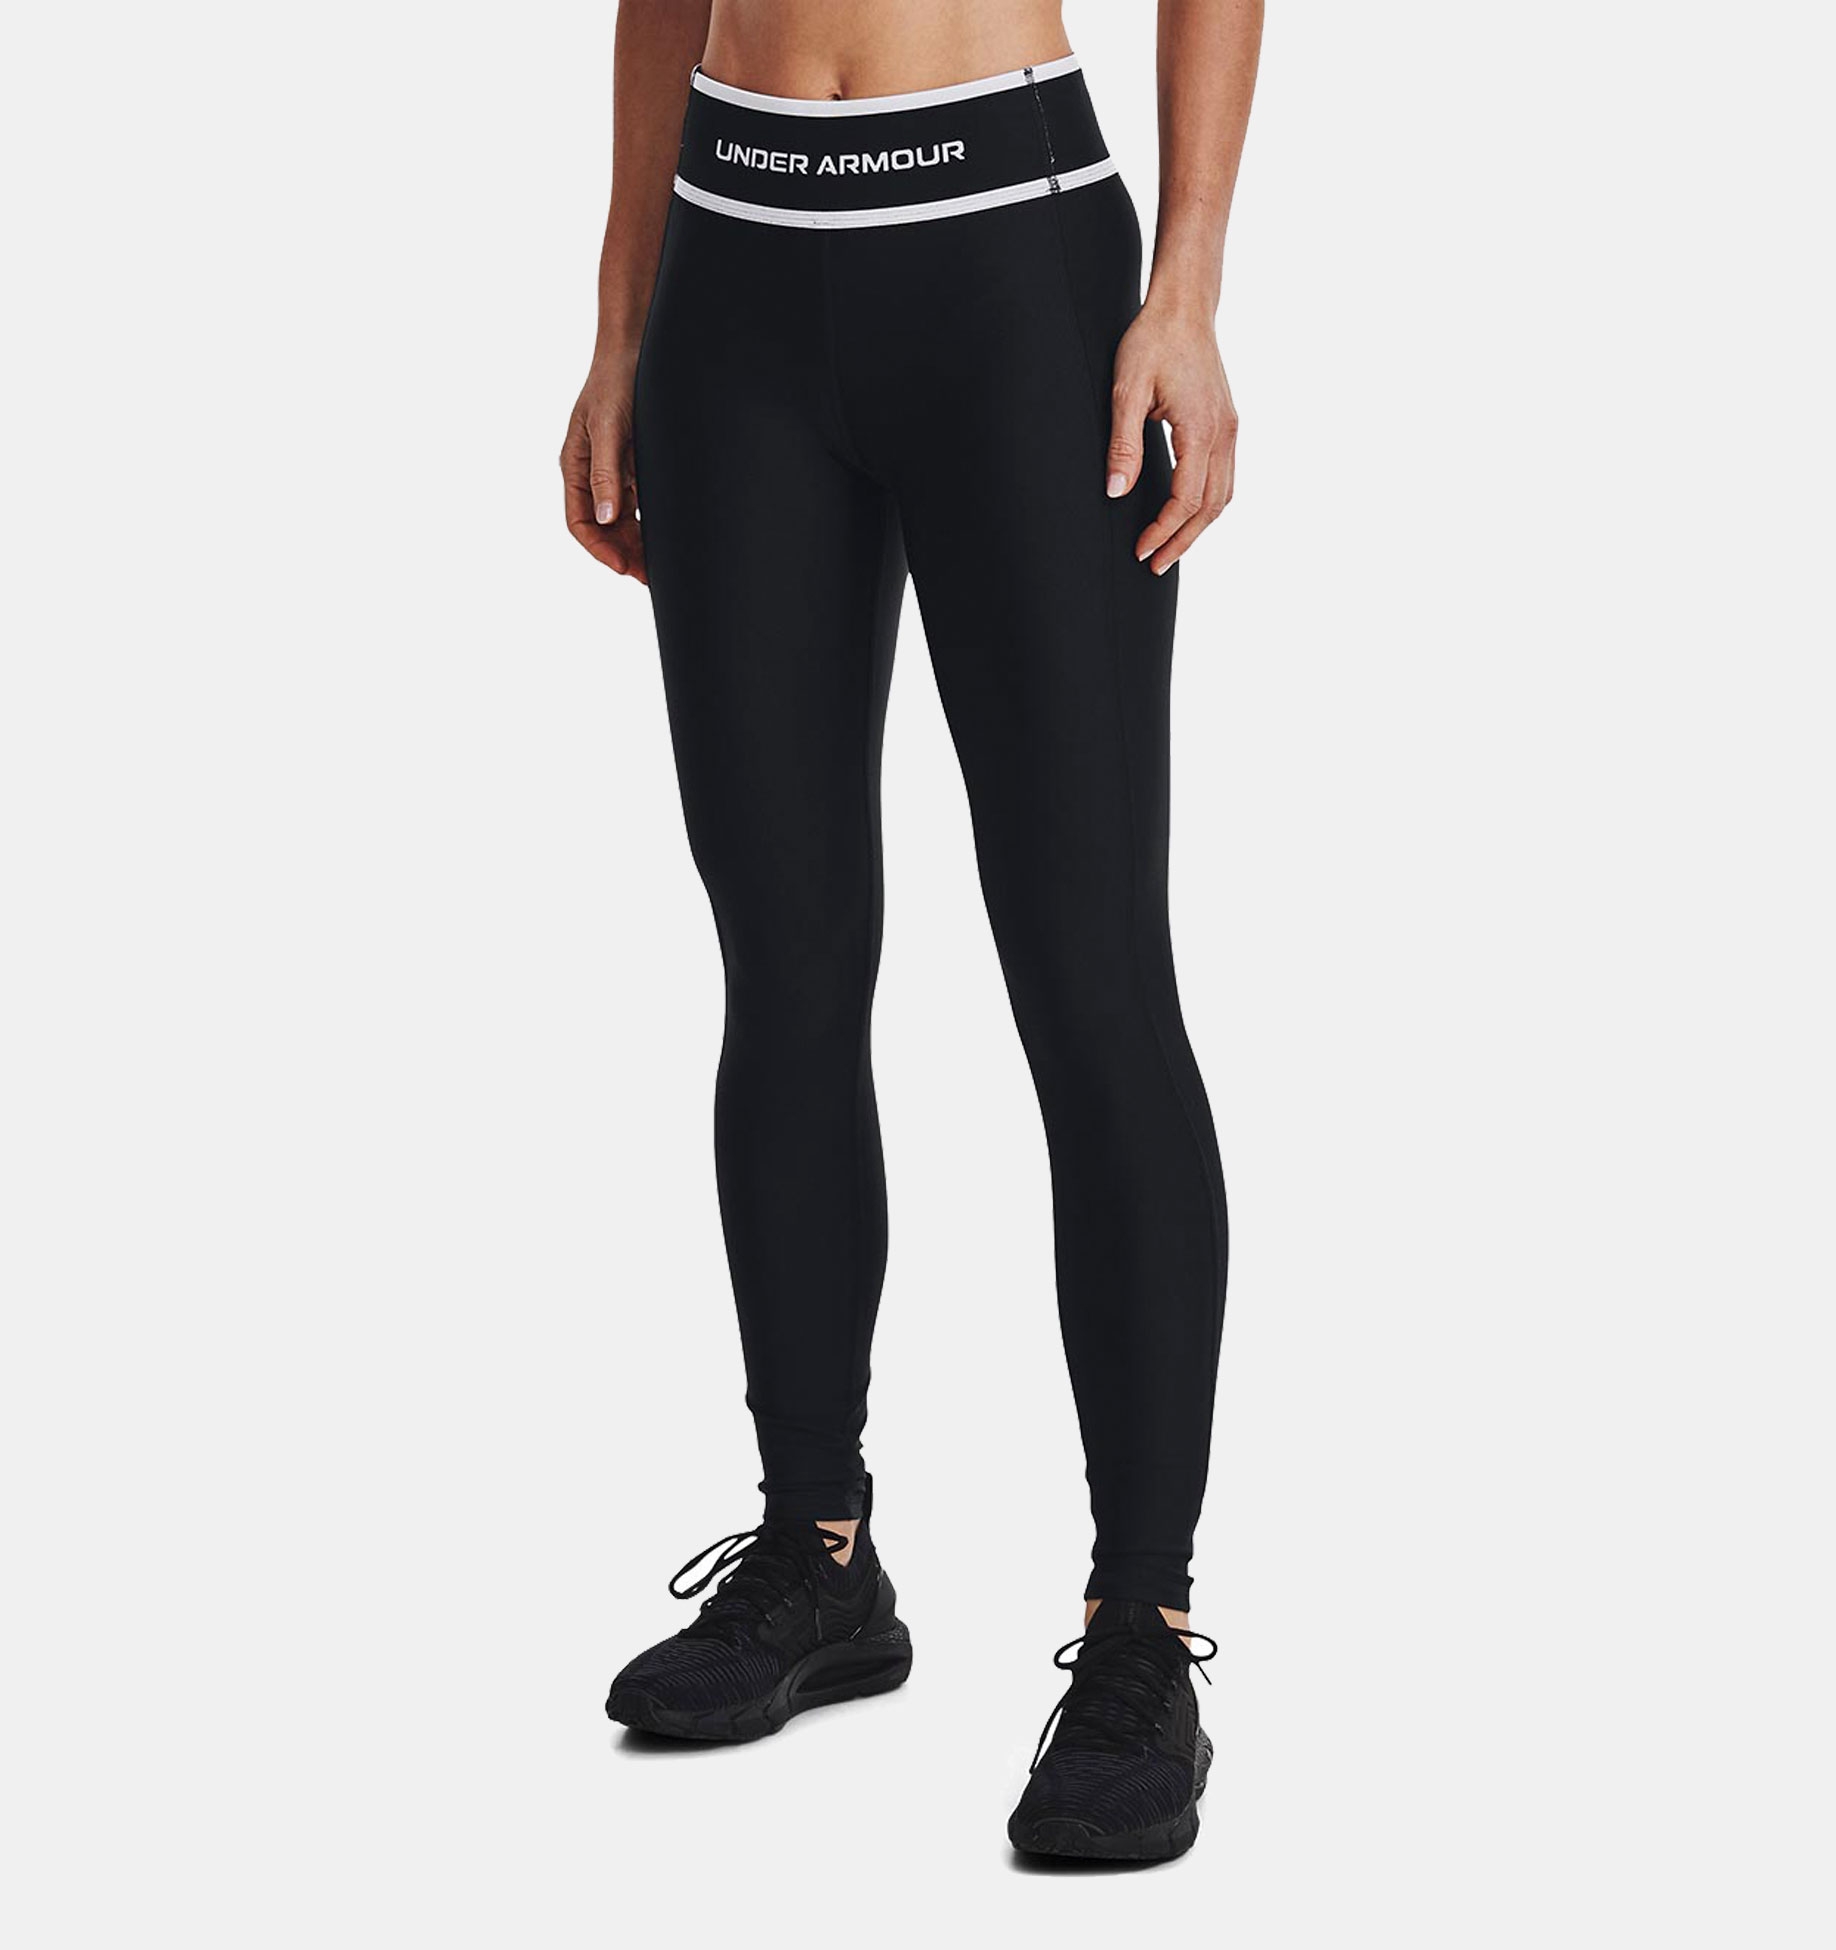 https://www.underarmour.com.ar/on/demandware.static/-/Sites-underarmour_staging/default/dw79338368/new_images/1369898/195252583804/195252583804-1.jpeg